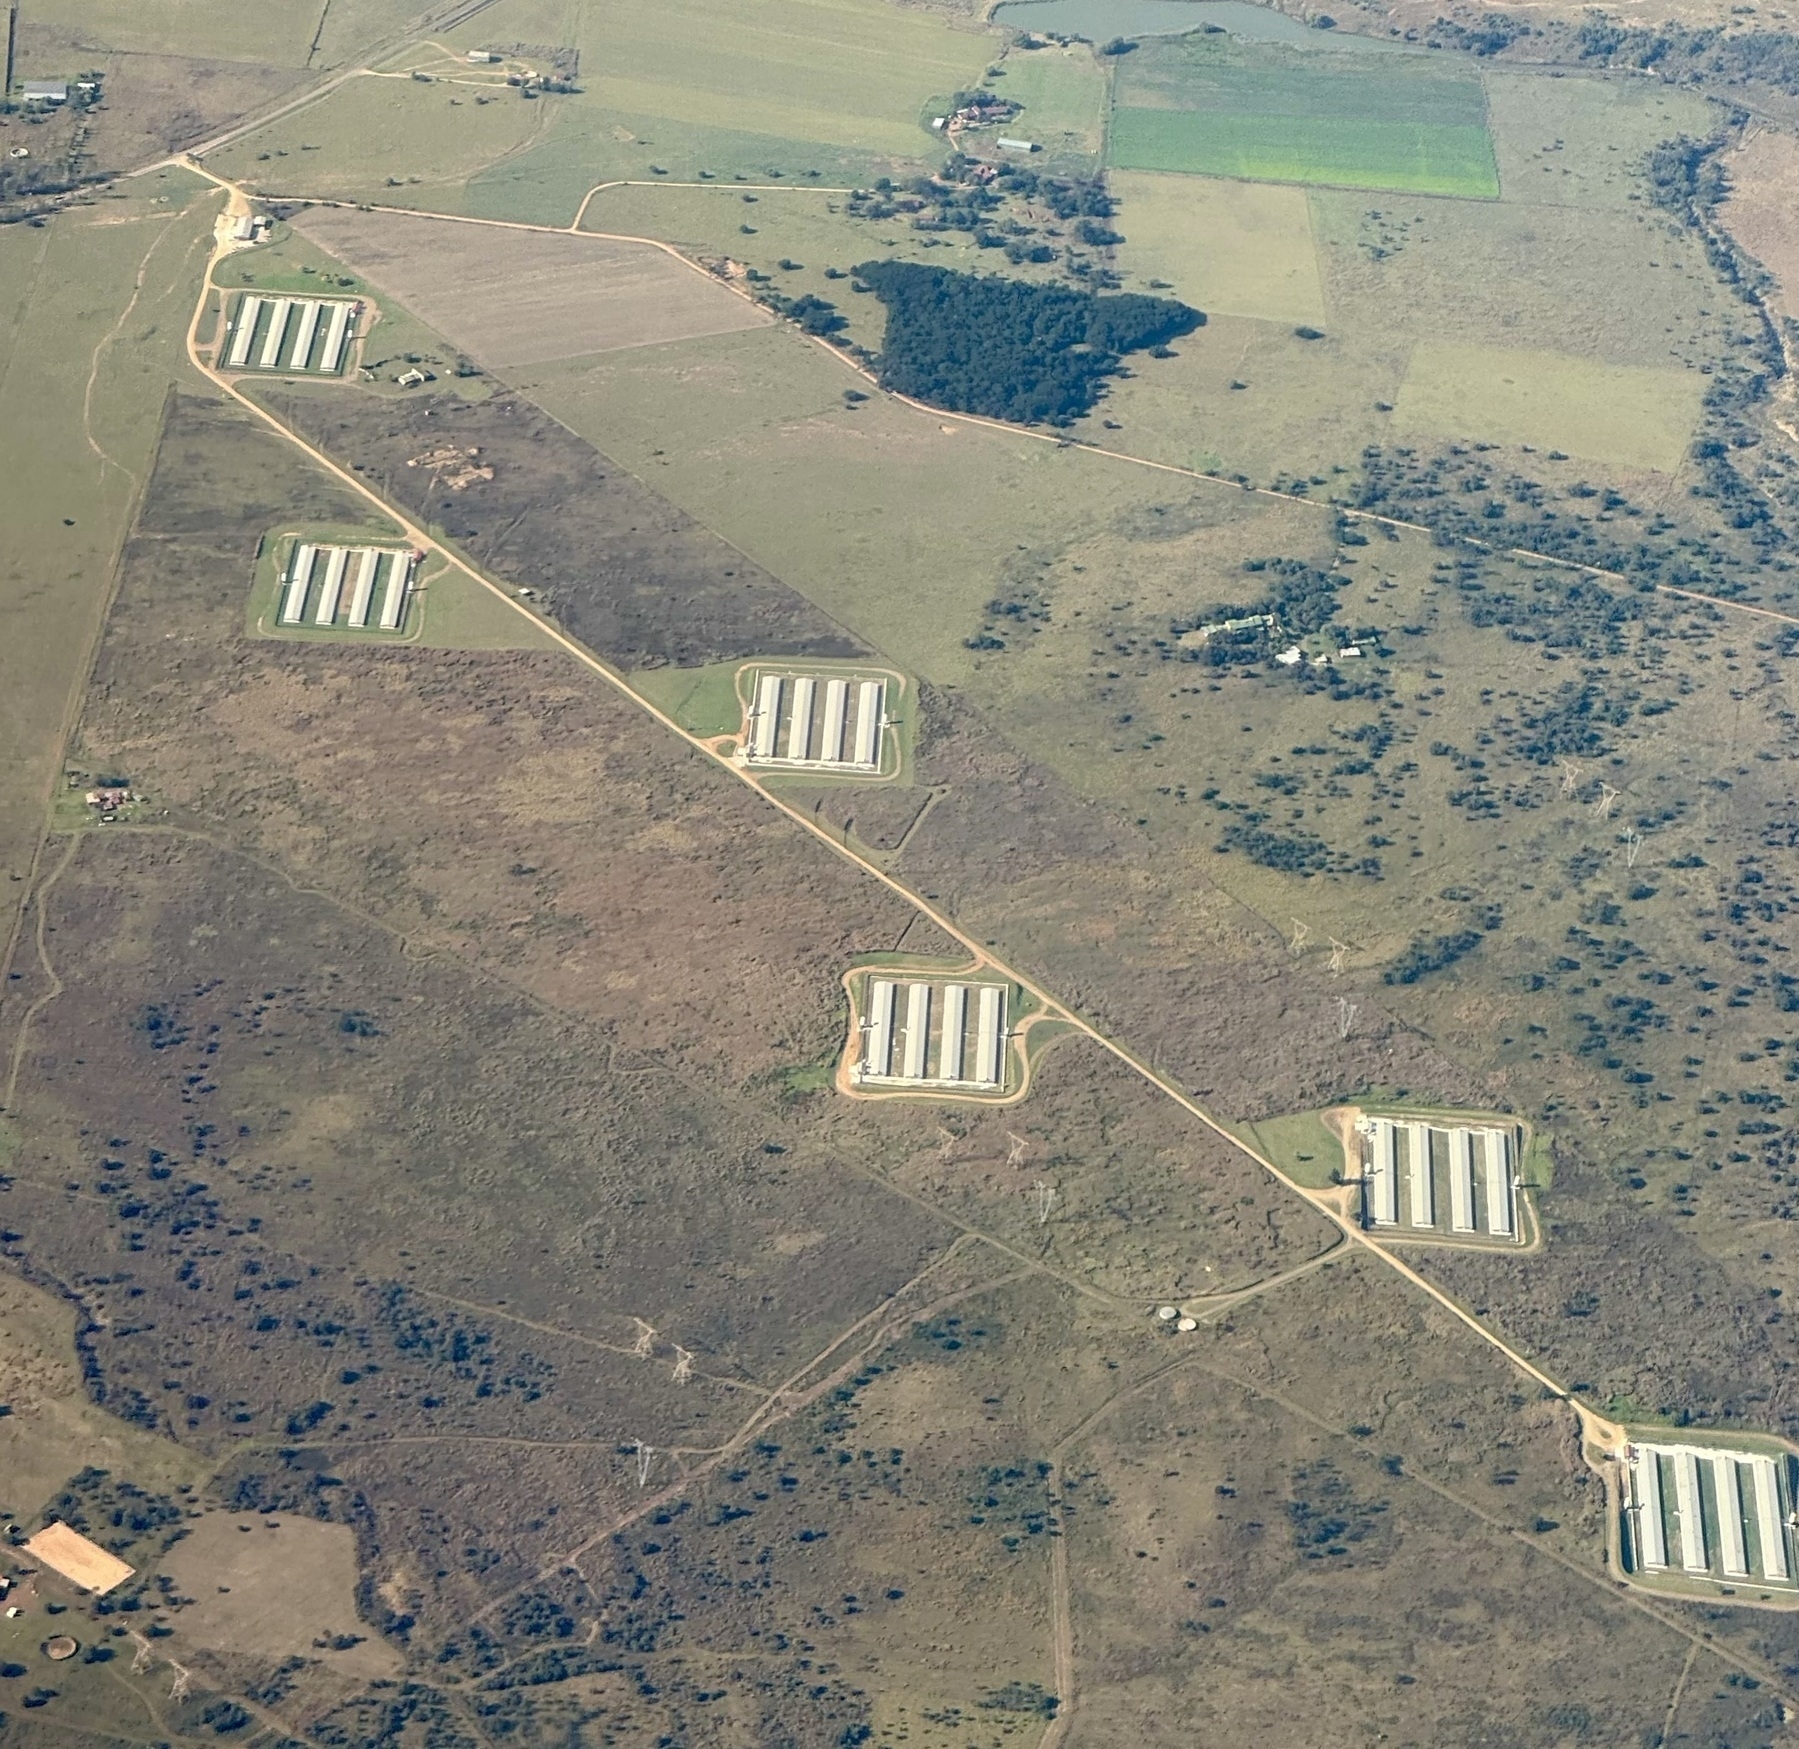 Neatly arranged buildings in a diagonal pattern, seen from a plane.